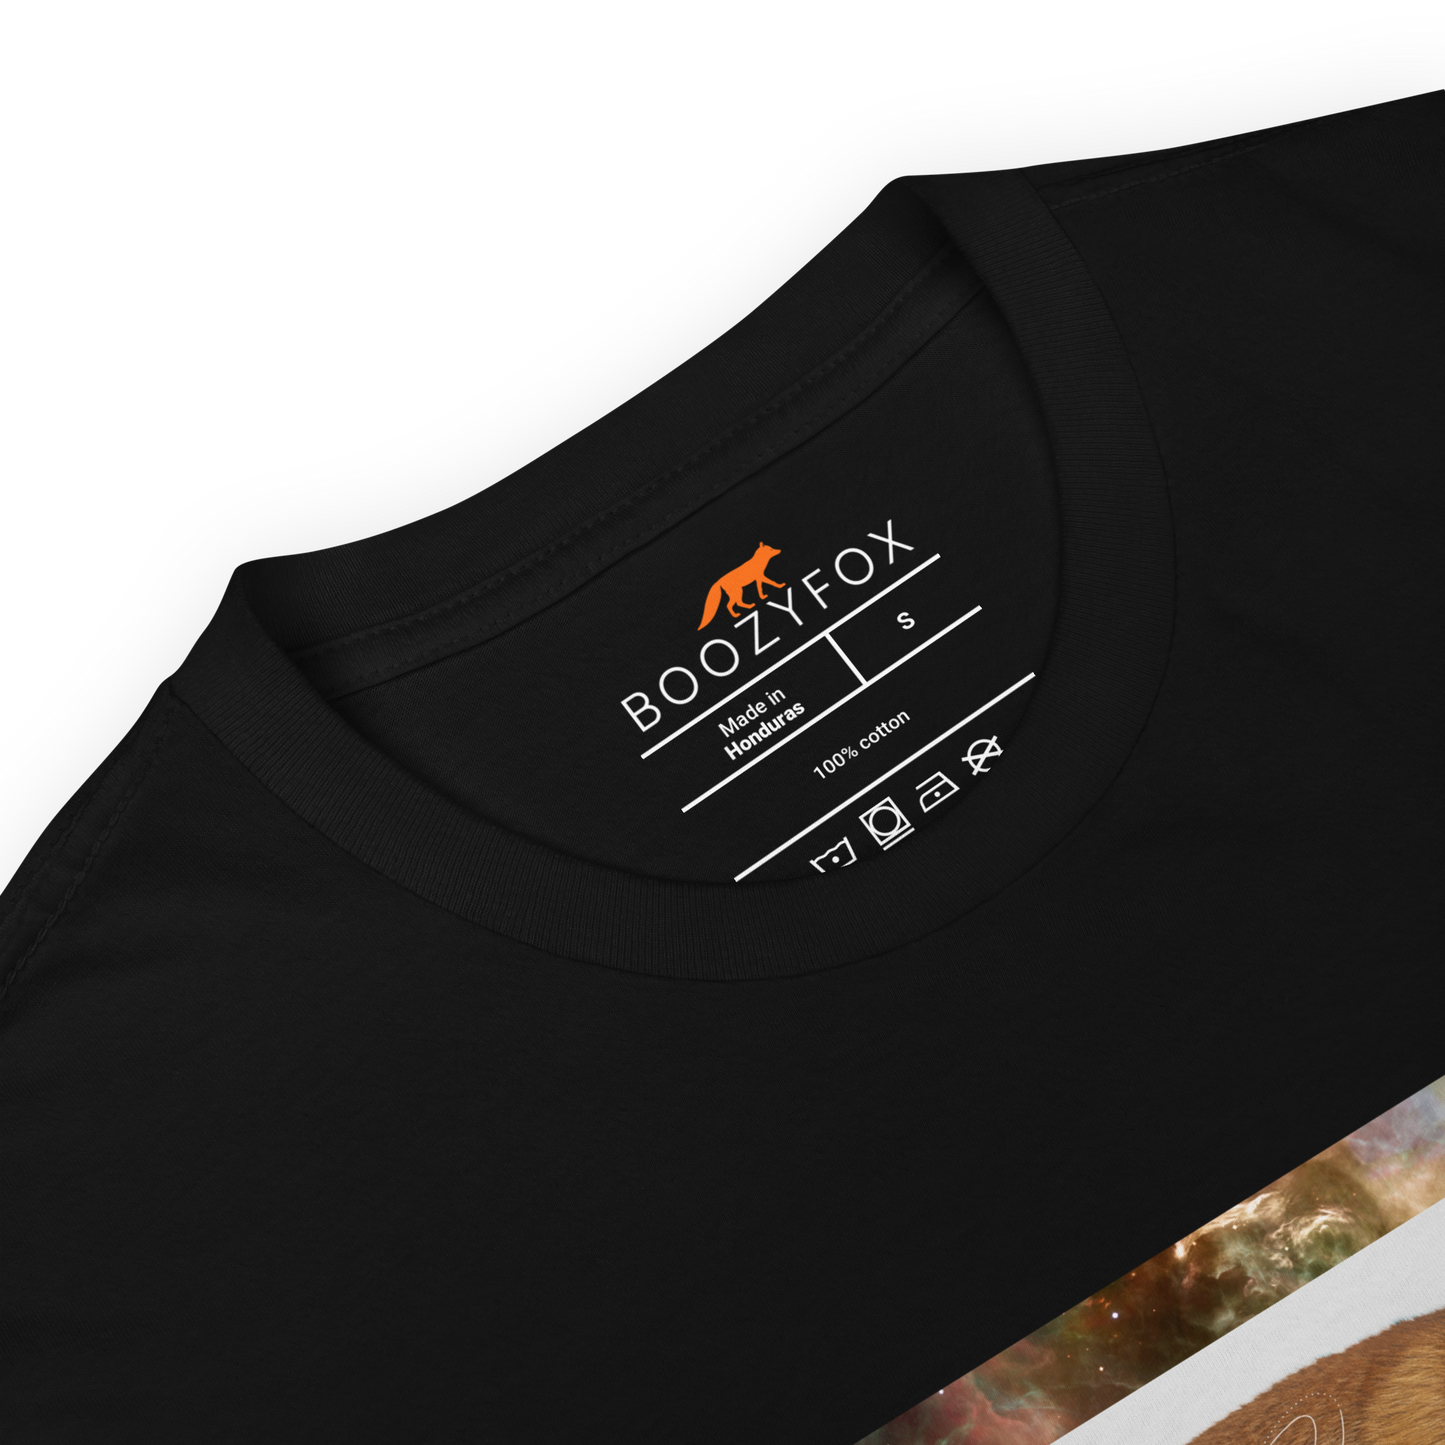 Product details of a Black Fox T-Shirt featuring a captivating Space Fox graphic on the chest - Cool Graphic Fox T-Shirts - Boozy Fox